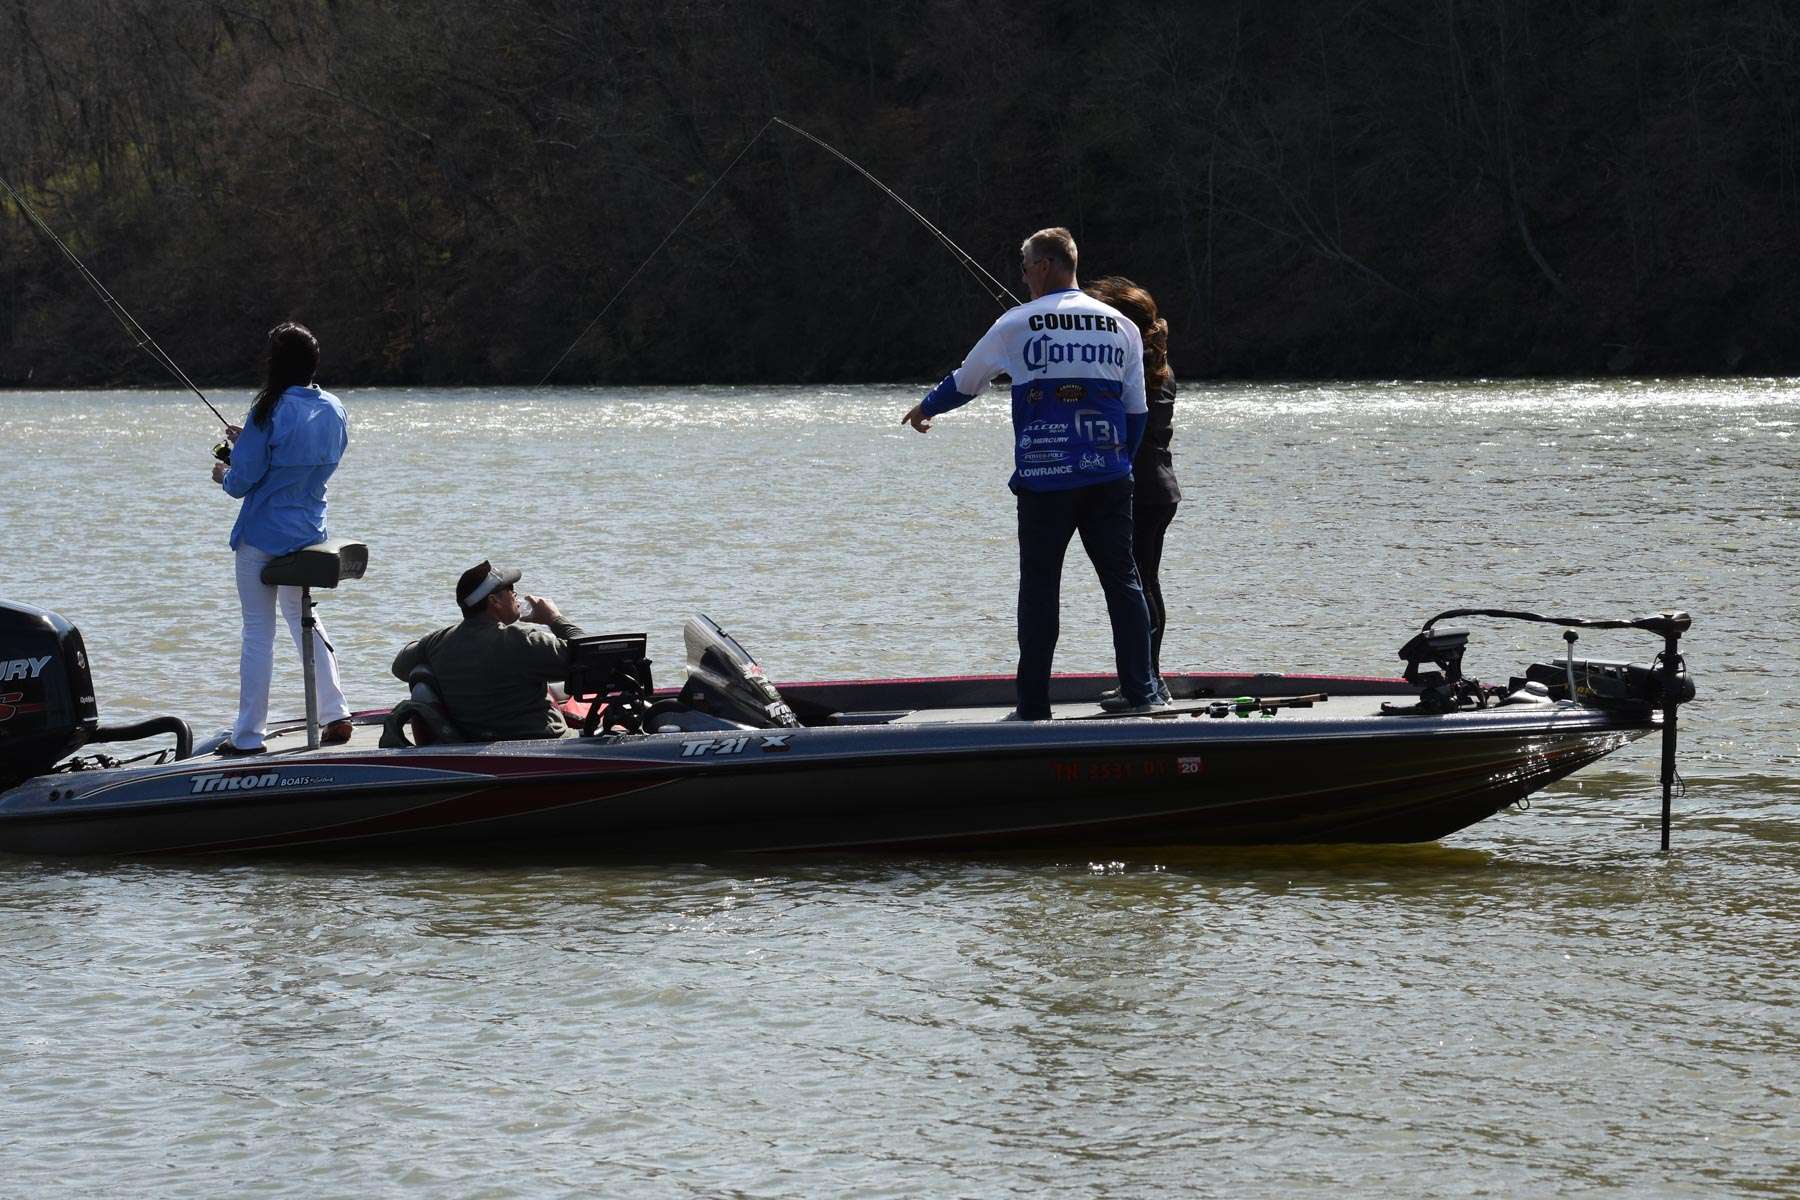 Brandon Coulter coaches First Lady Maria Lee during their brief fishing outing on the Tennessee River

